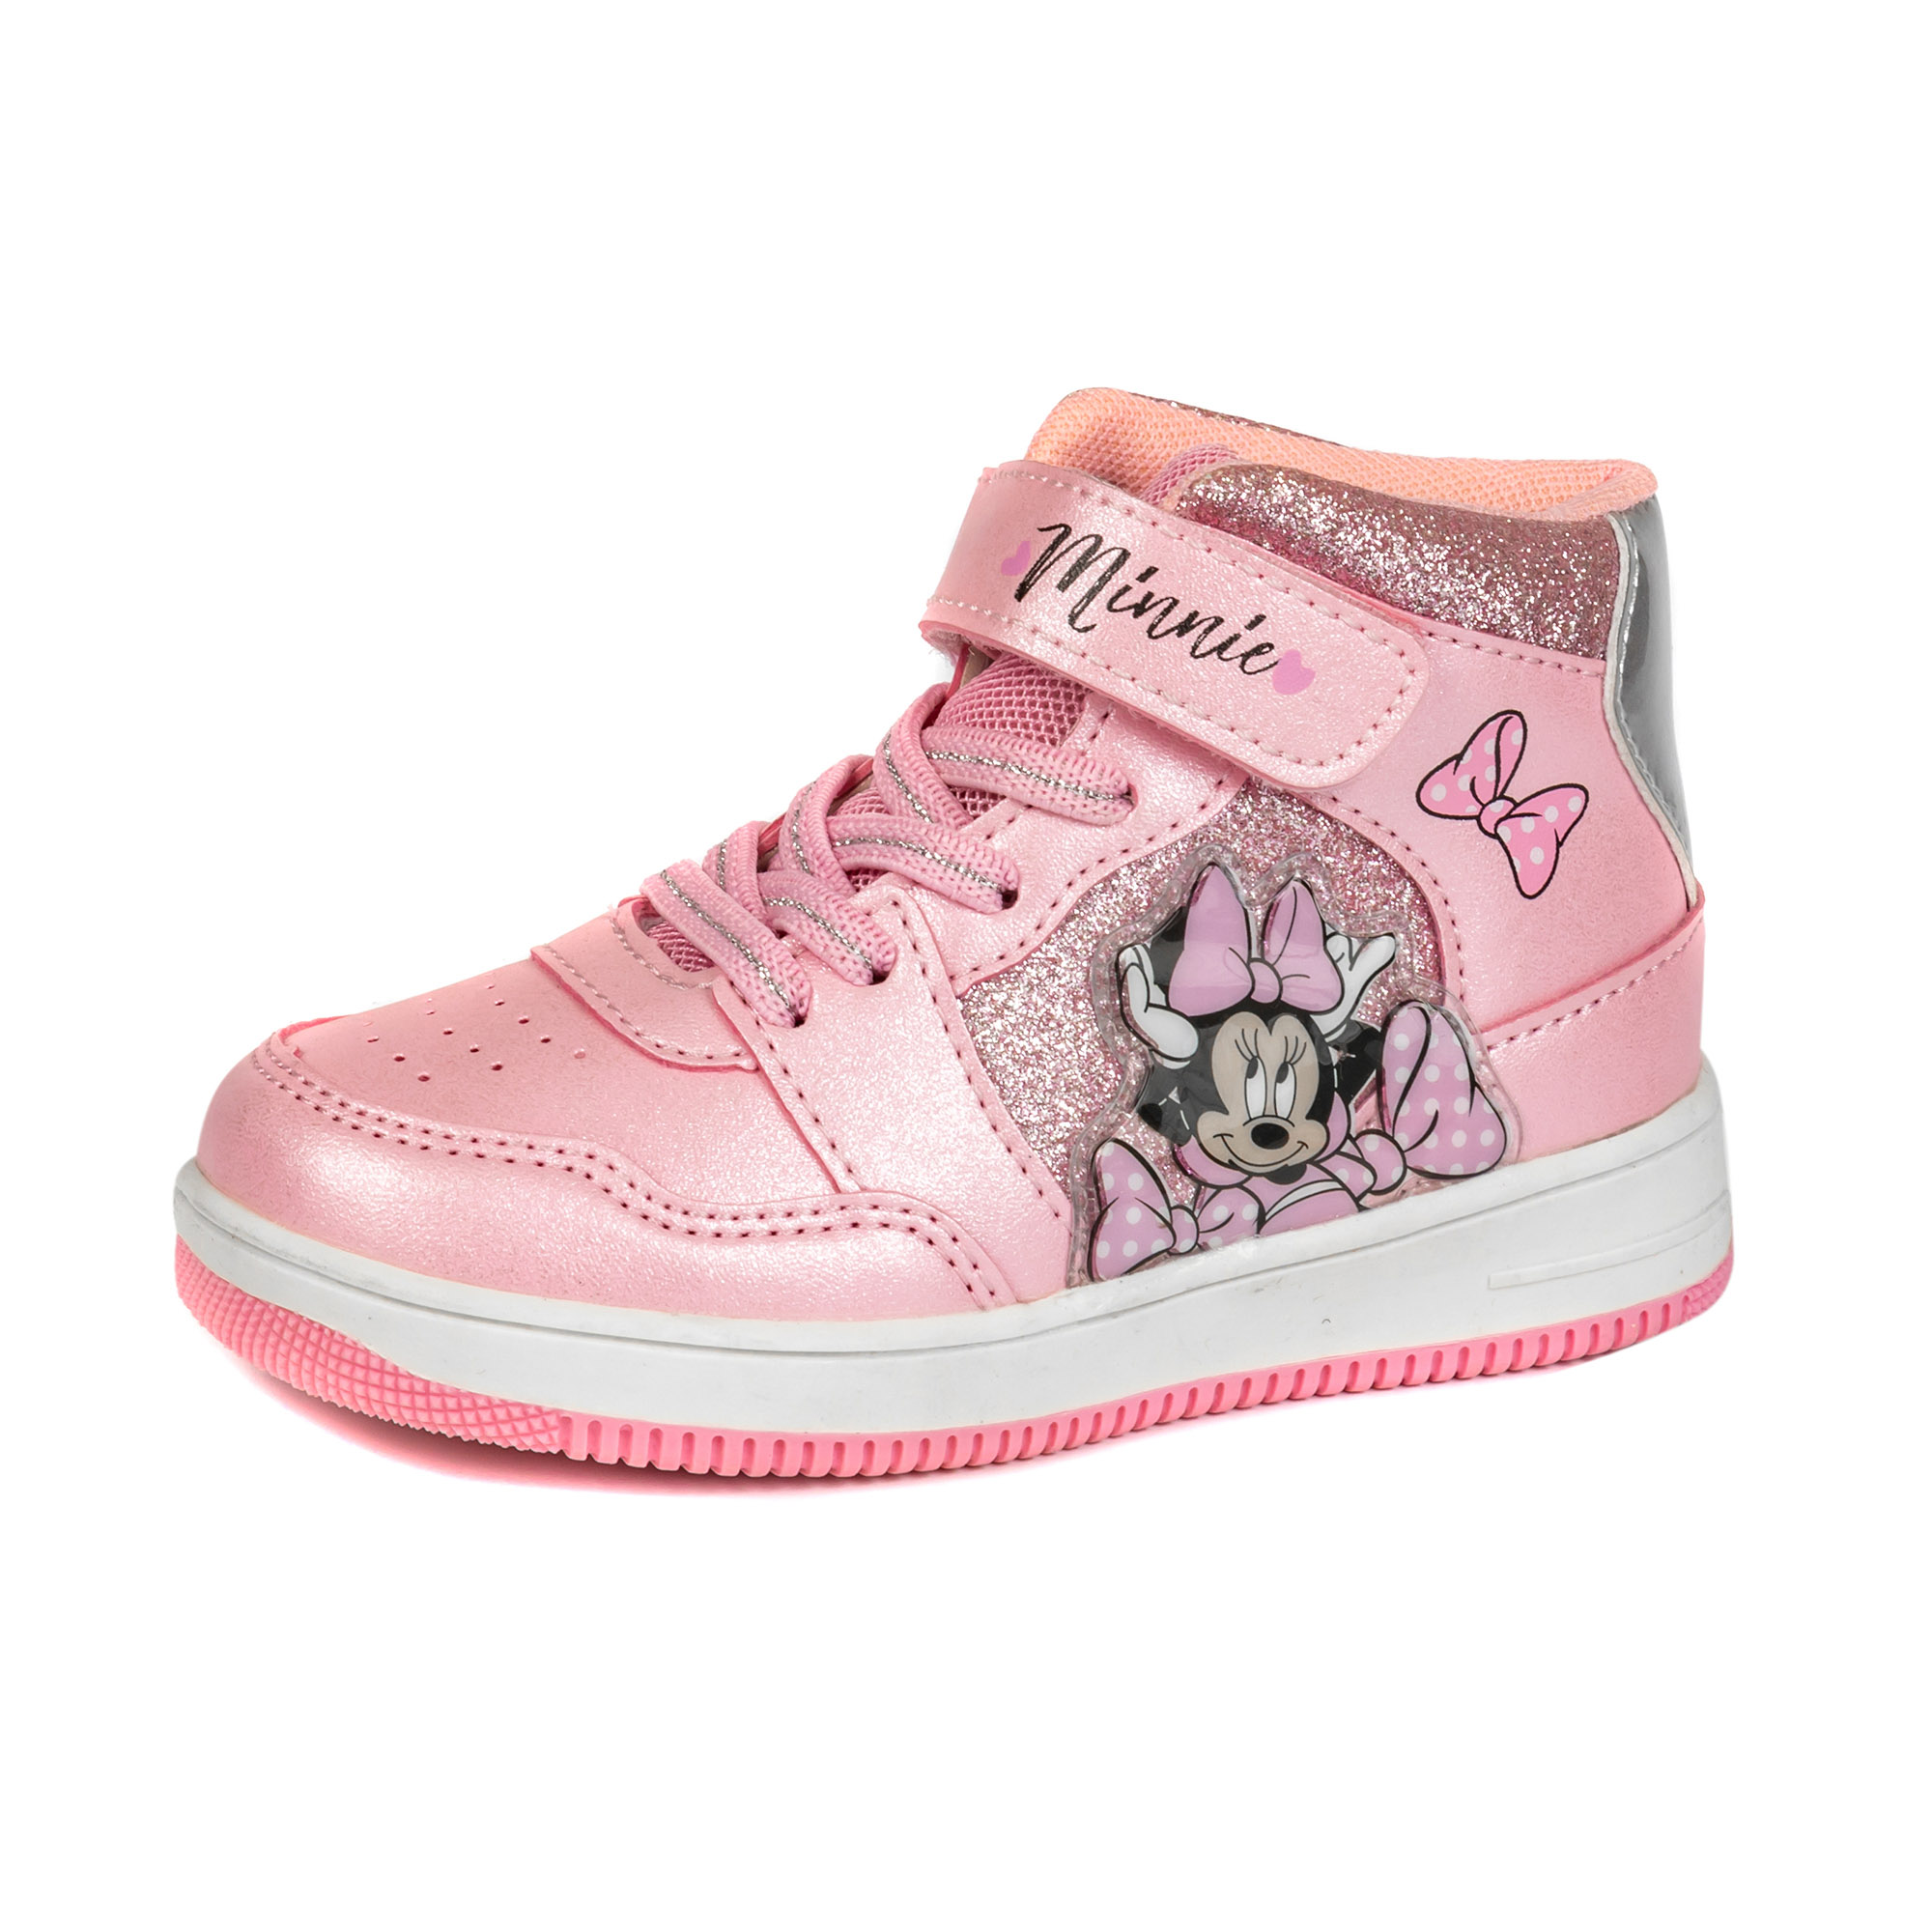 Sport shoes,Basketball Shoes,Children shoes,Pink,PU Upper,VELCRO +Shoe lace style,TPR Outsole